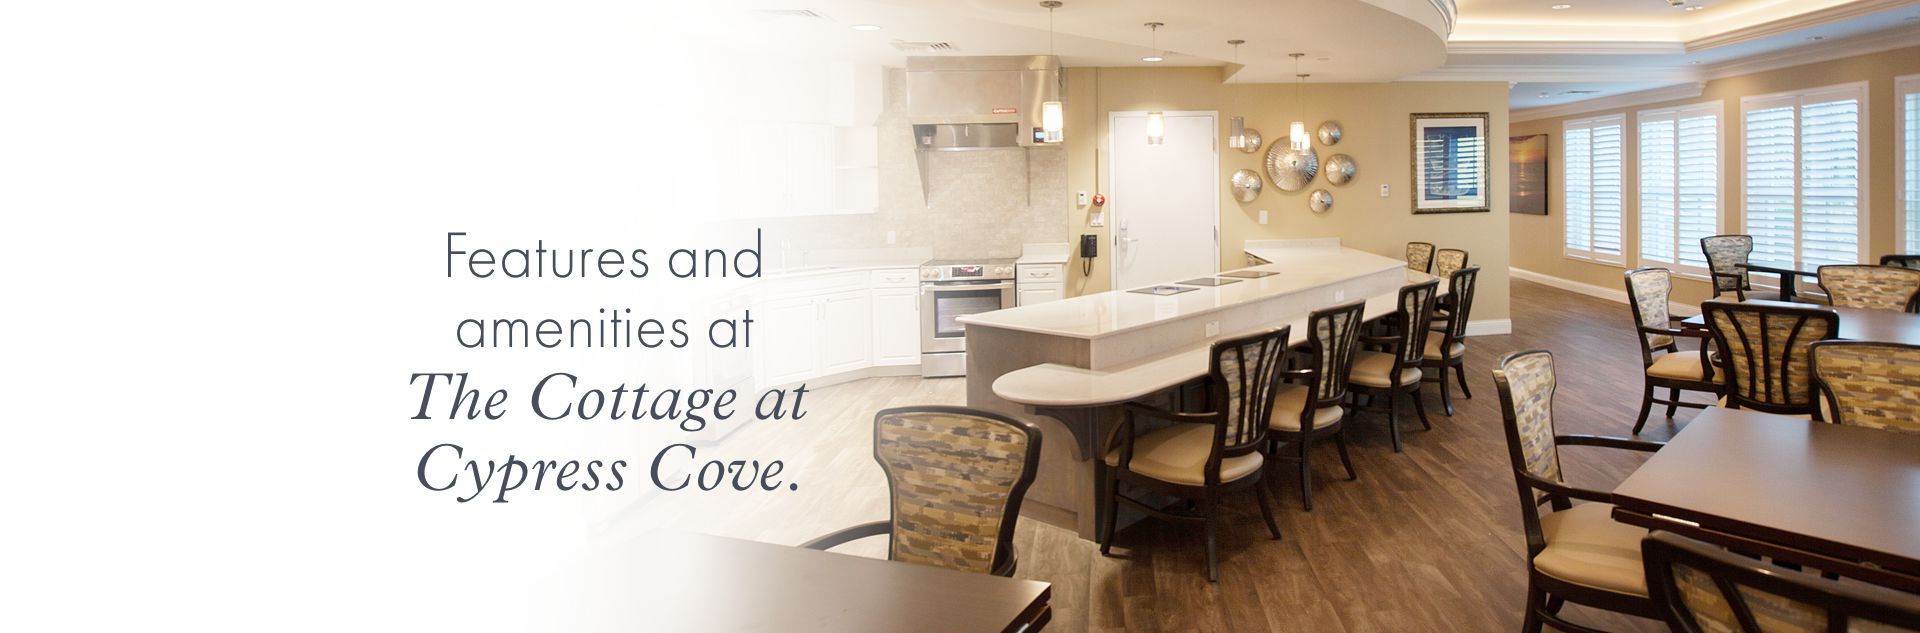 Features and amenities at The Cottage at Cypress Cove.